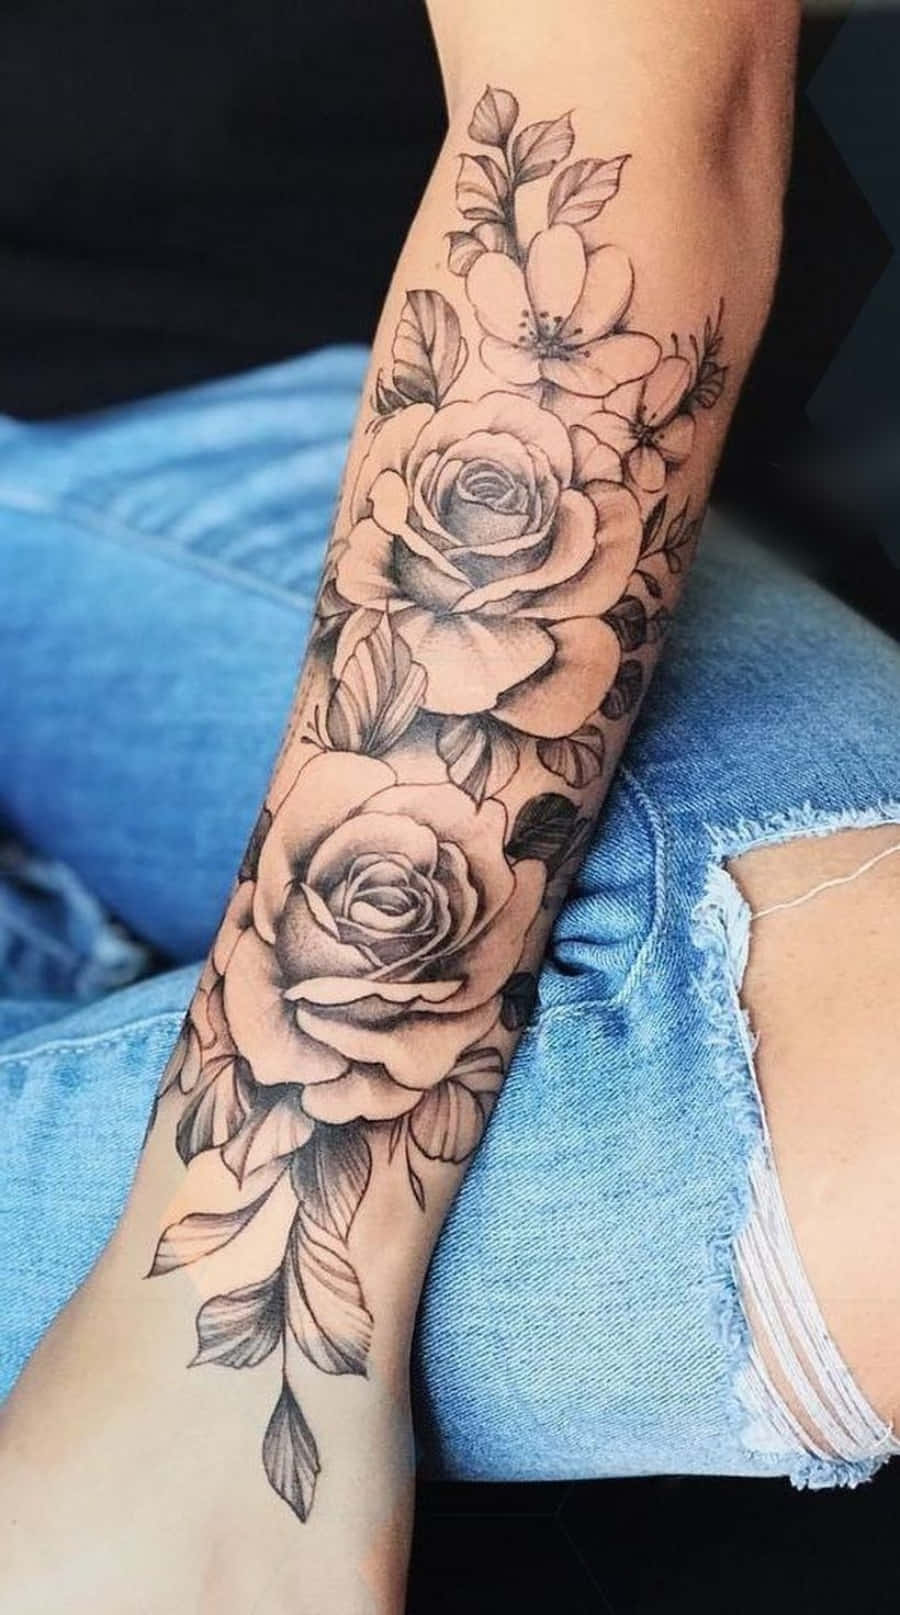 Women's Forearm Tattoos: Embracing Artistic Expressions and Femininity | CB  Ink Tattoo